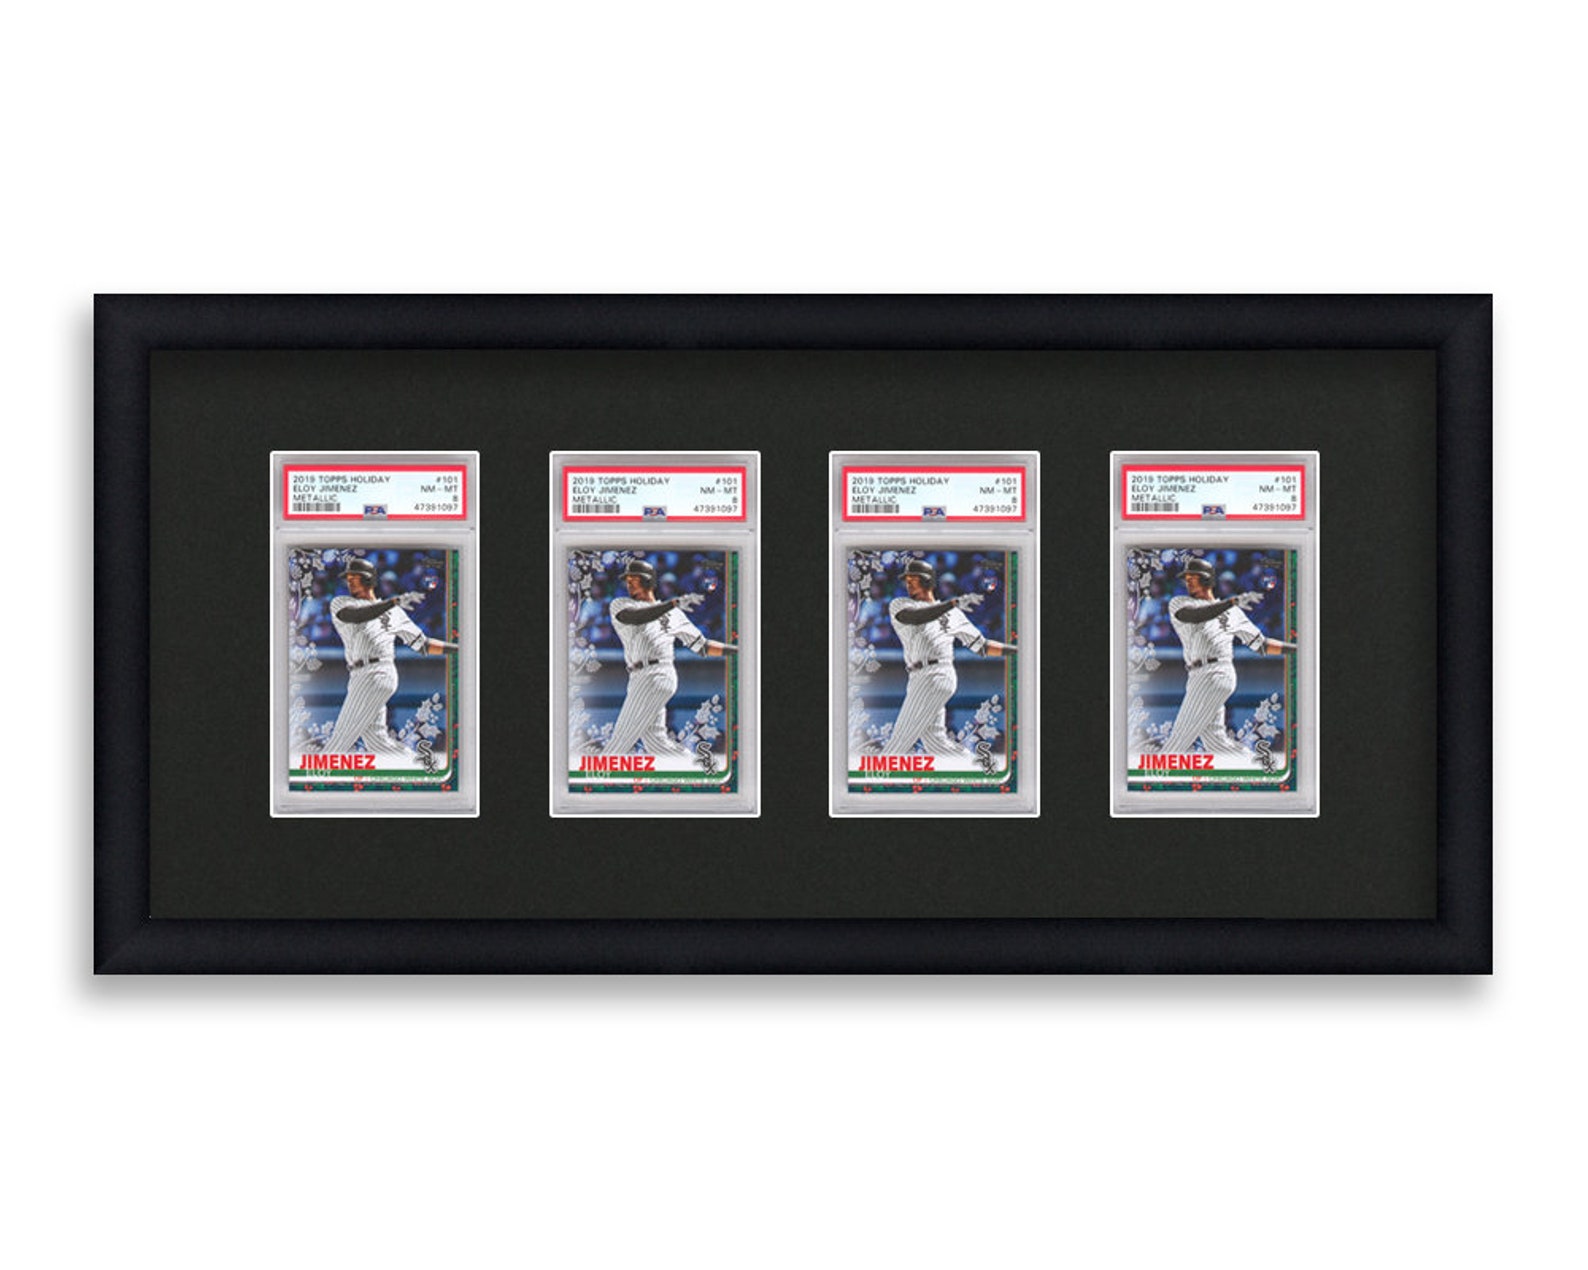 Psa Graded Card Frame Display 4 Opening Frame Fitted For 4 Psa Etsy